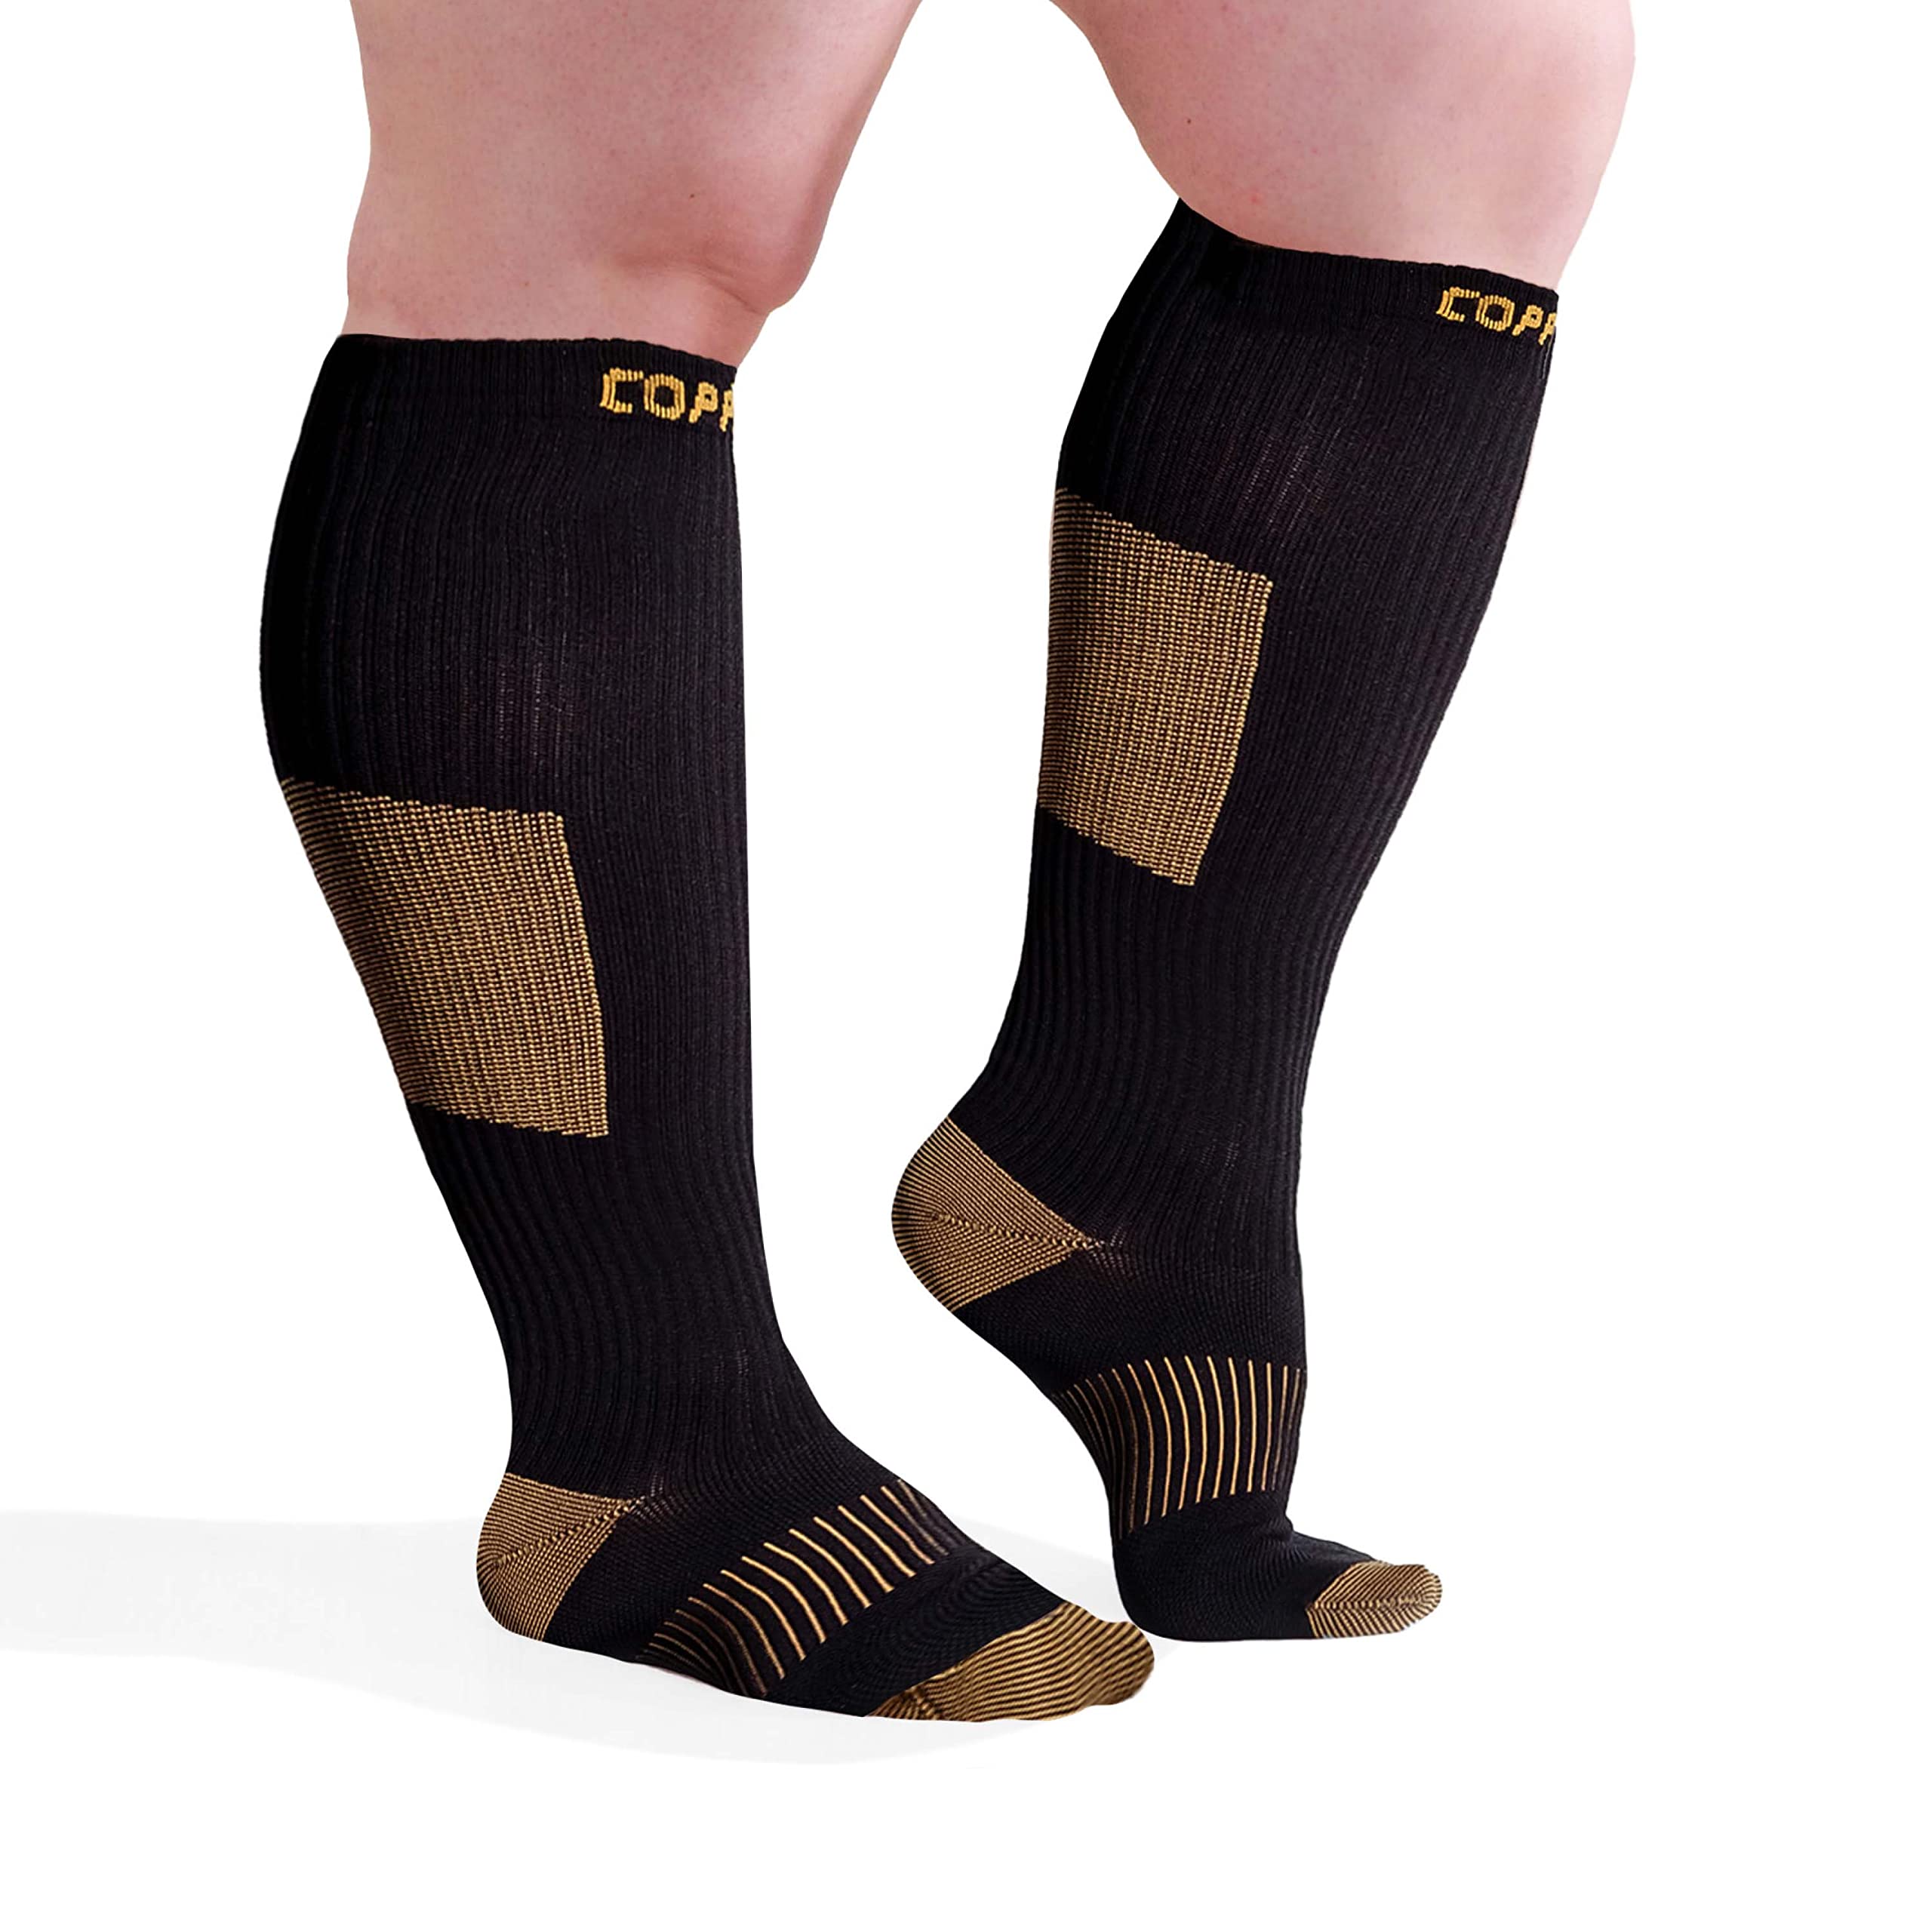 Wide Calf Copper Compression Socks for Women & Men - Diabetic Sock,  Improves Circulation, Reduces Swelling & Pain - For Nurses, Running, &  Everyday Use - Copper Infused Nylon By CopperJoint (2X-Large)